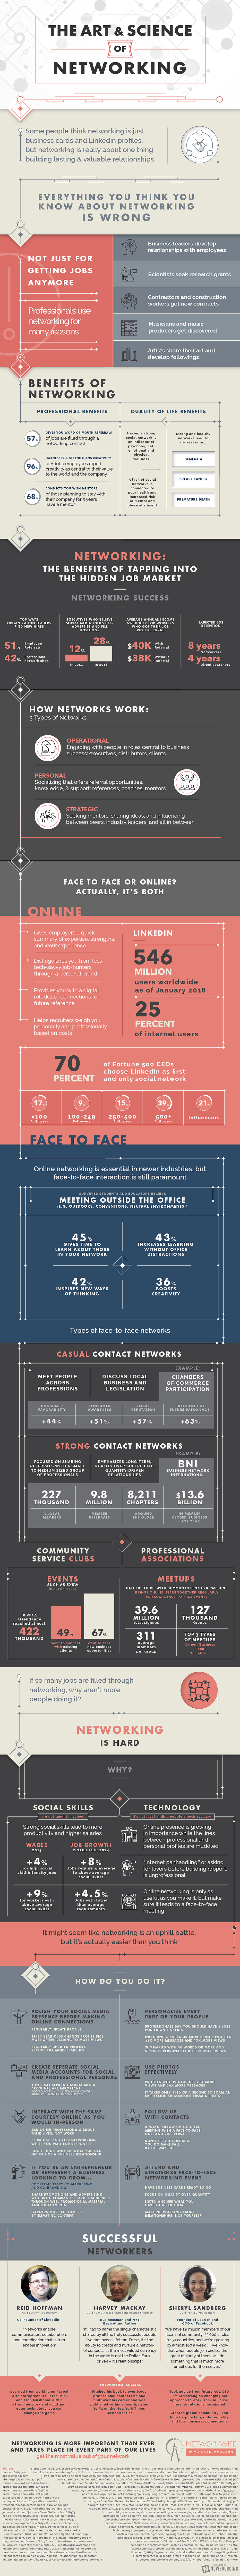 The Art & Science Of Networking